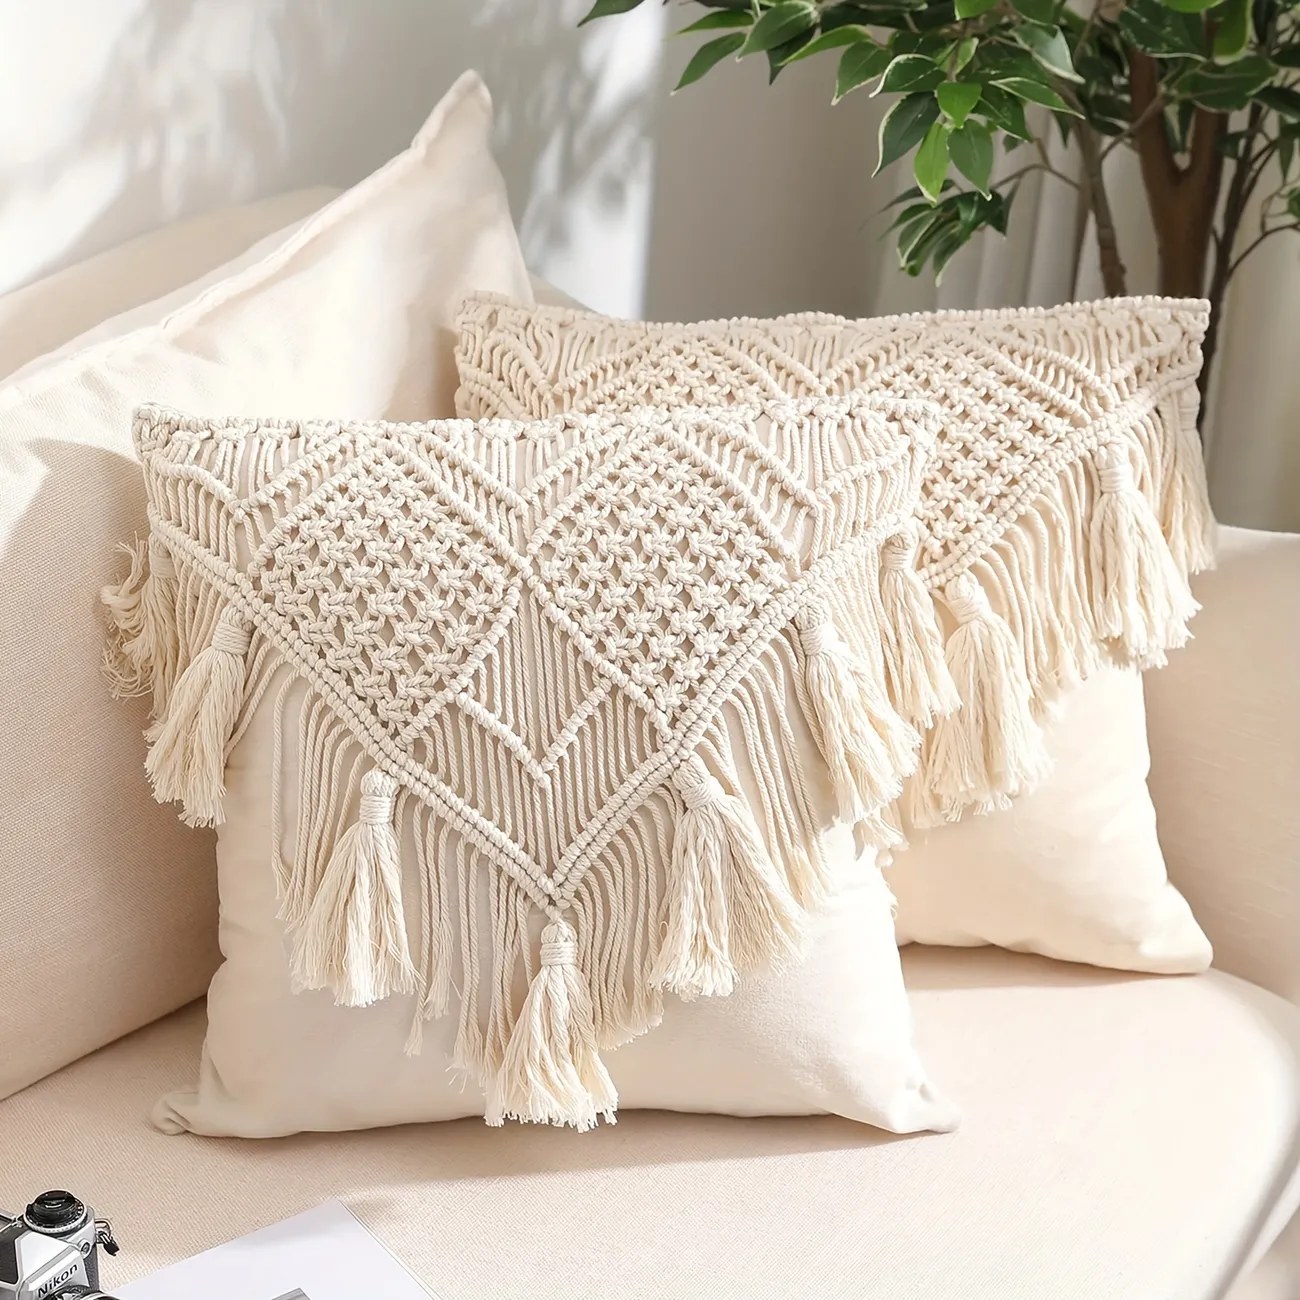 1pc Boho Woven Throw Pillow Covers With Tassels Macrame Cushion Case For Bed Sofa Couch Bench Car Home Decor No Pillow Insert 17 17 Inch